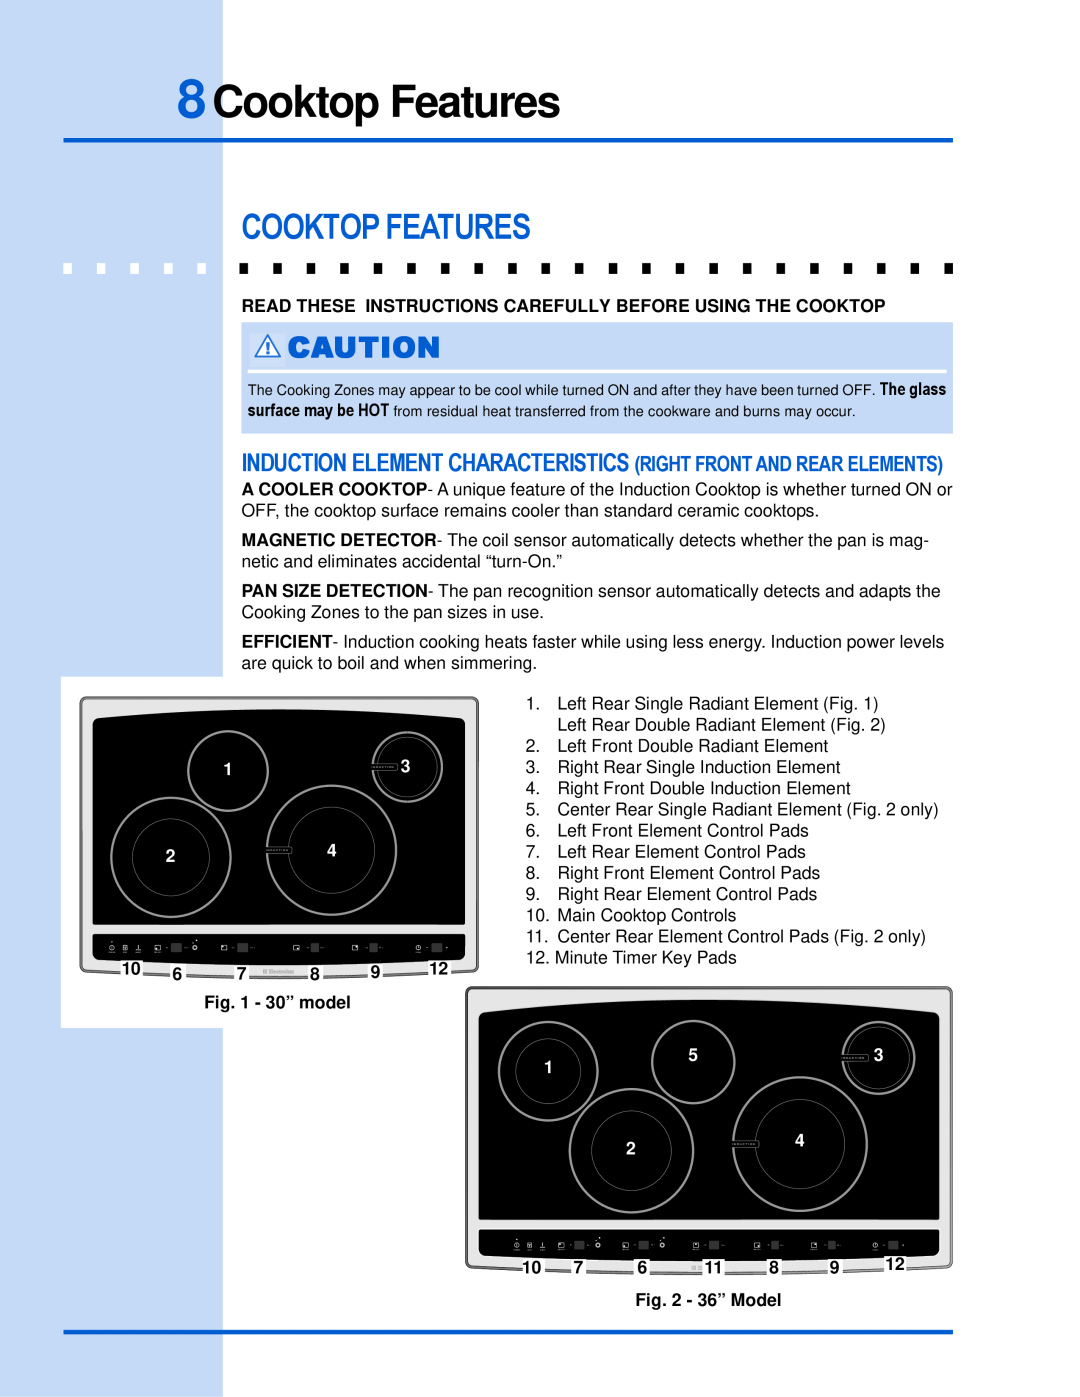 Electrolux 318 203 603 (0709) 8Cooktop Features, Read These Instructions Carefully Before Using The Cooktop, 30” model 